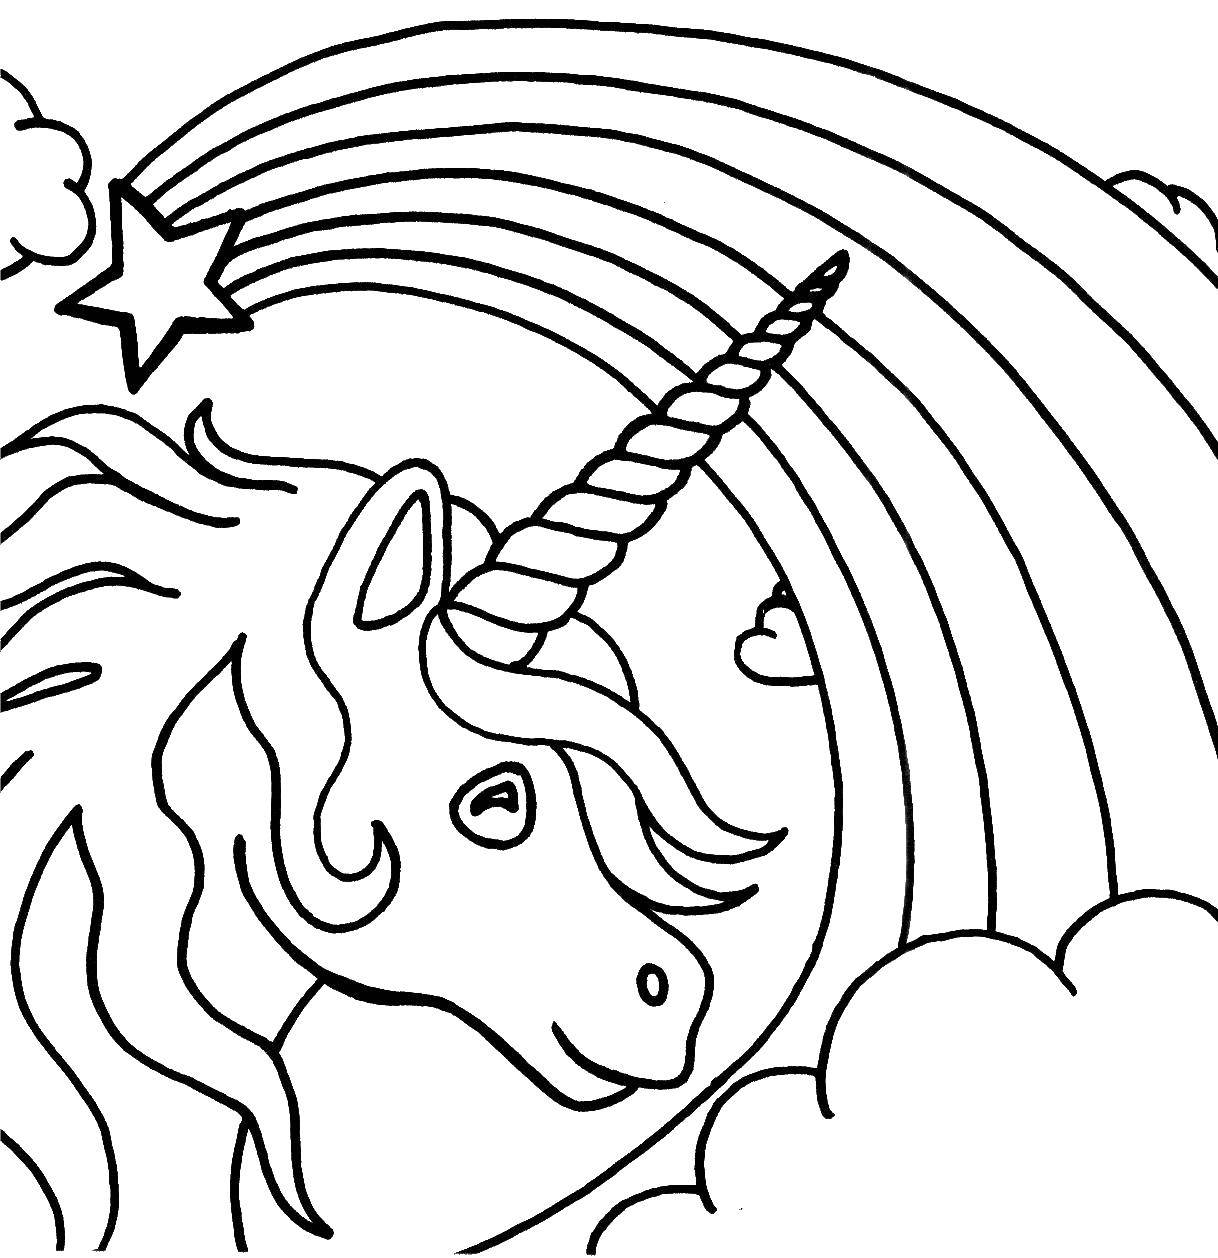 Coloring Rainbow and unicorn. Category coloring. Tags:  that rainbow, unicorn, star.